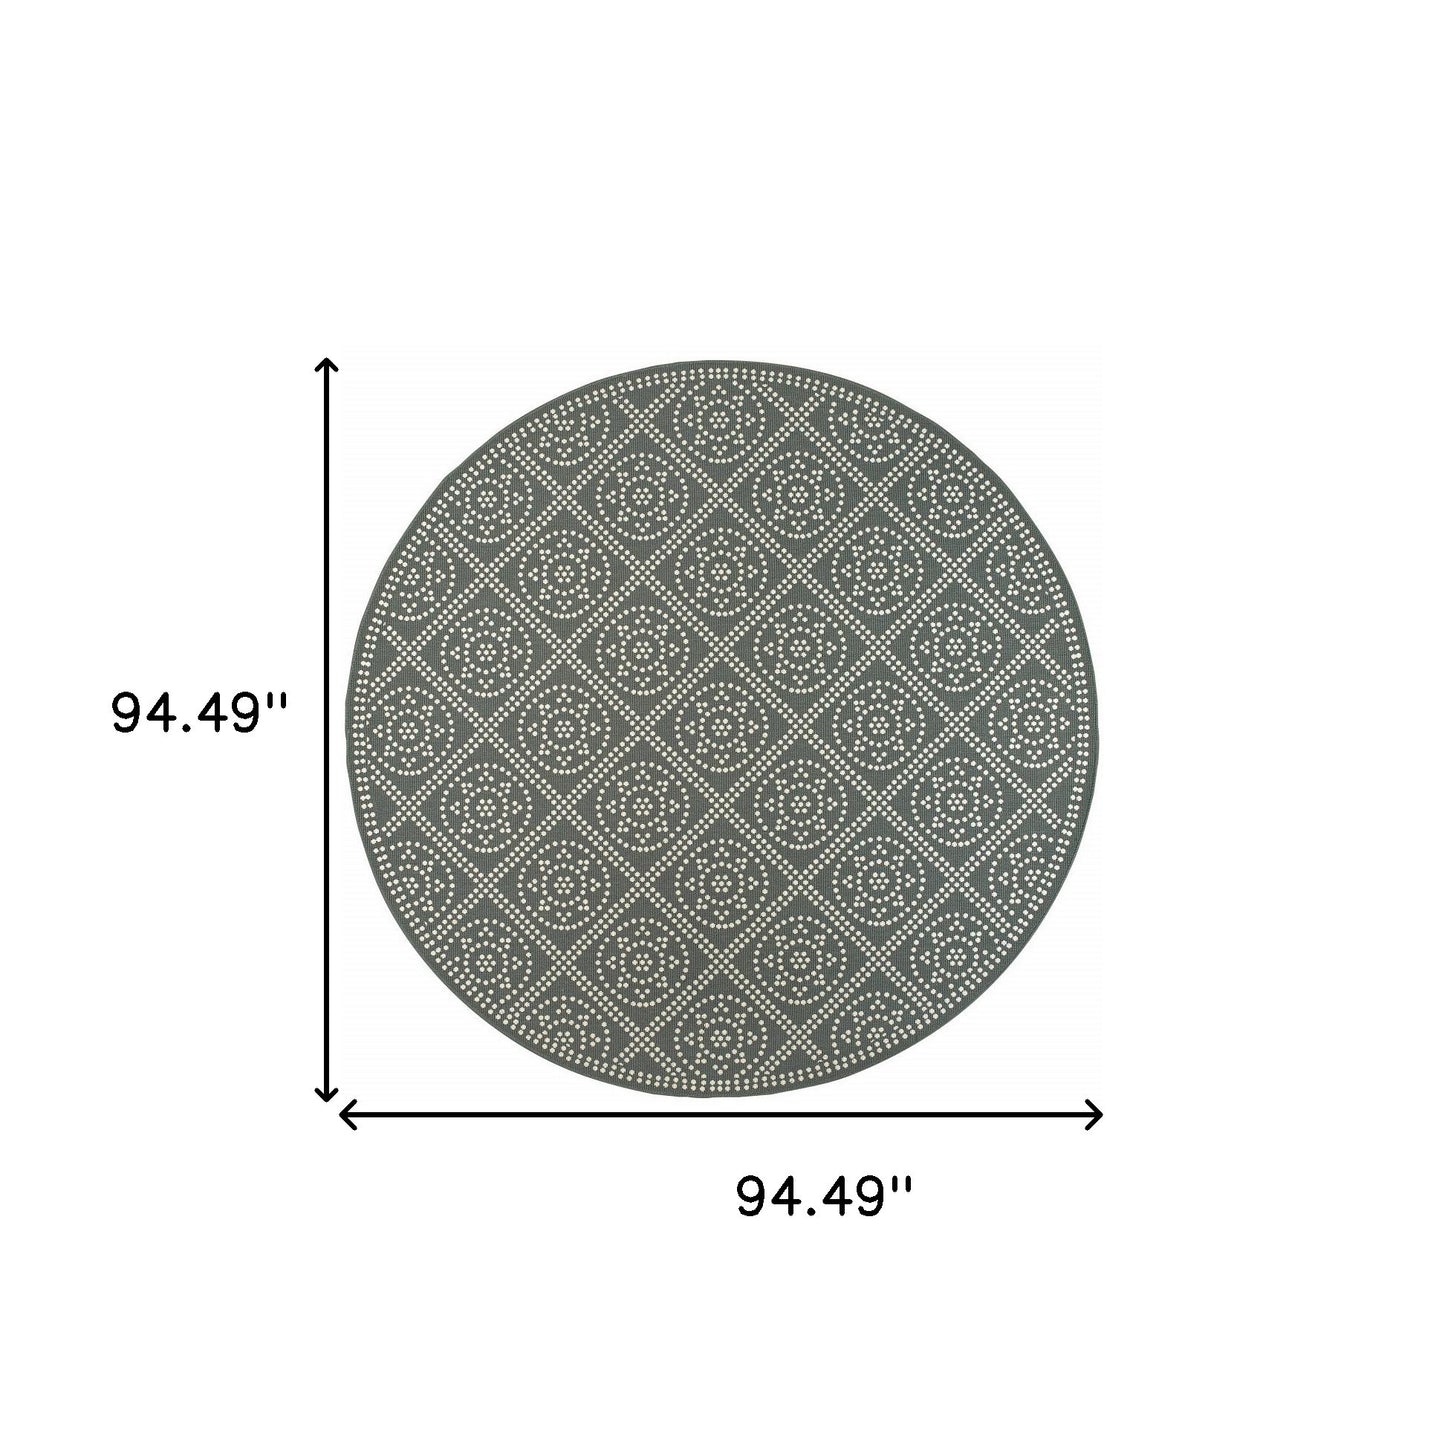 8' x 8' Gray and Ivory Round Geometric Stain Resistant Indoor Outdoor Area Rug